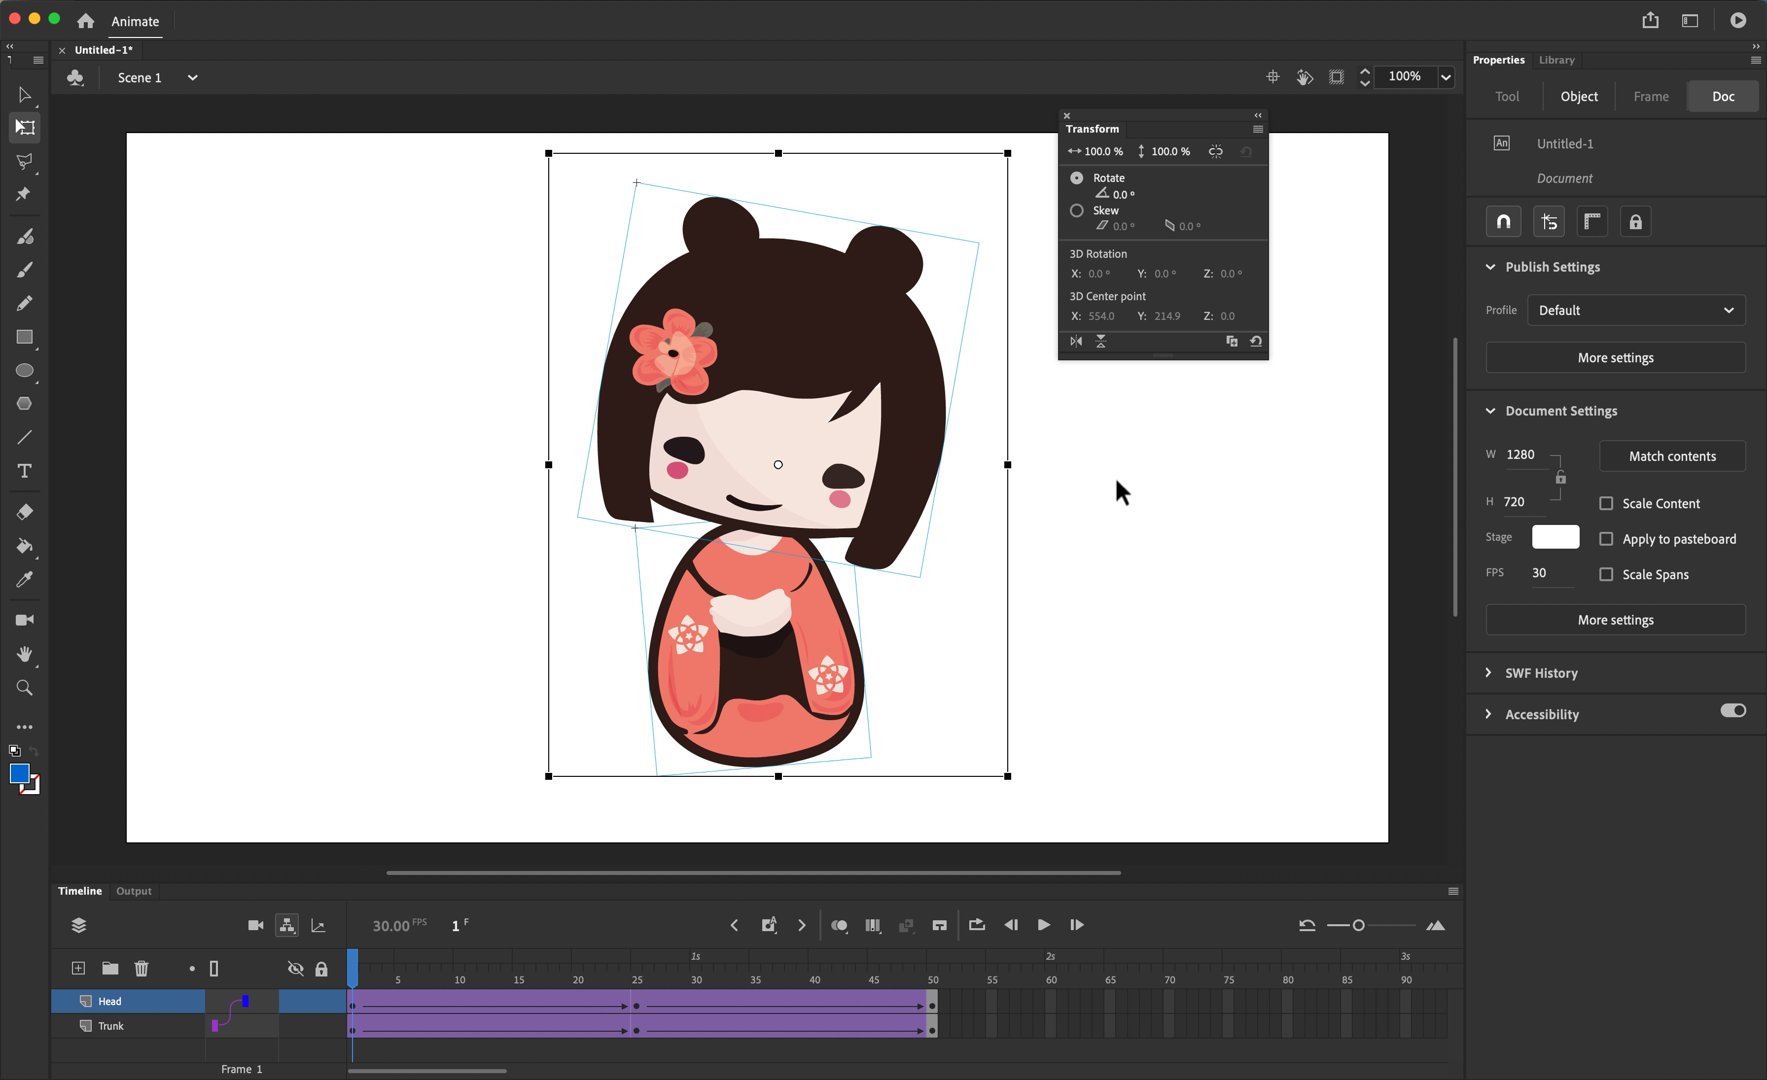 Adobe Animate-Animationssoftware in Aktion